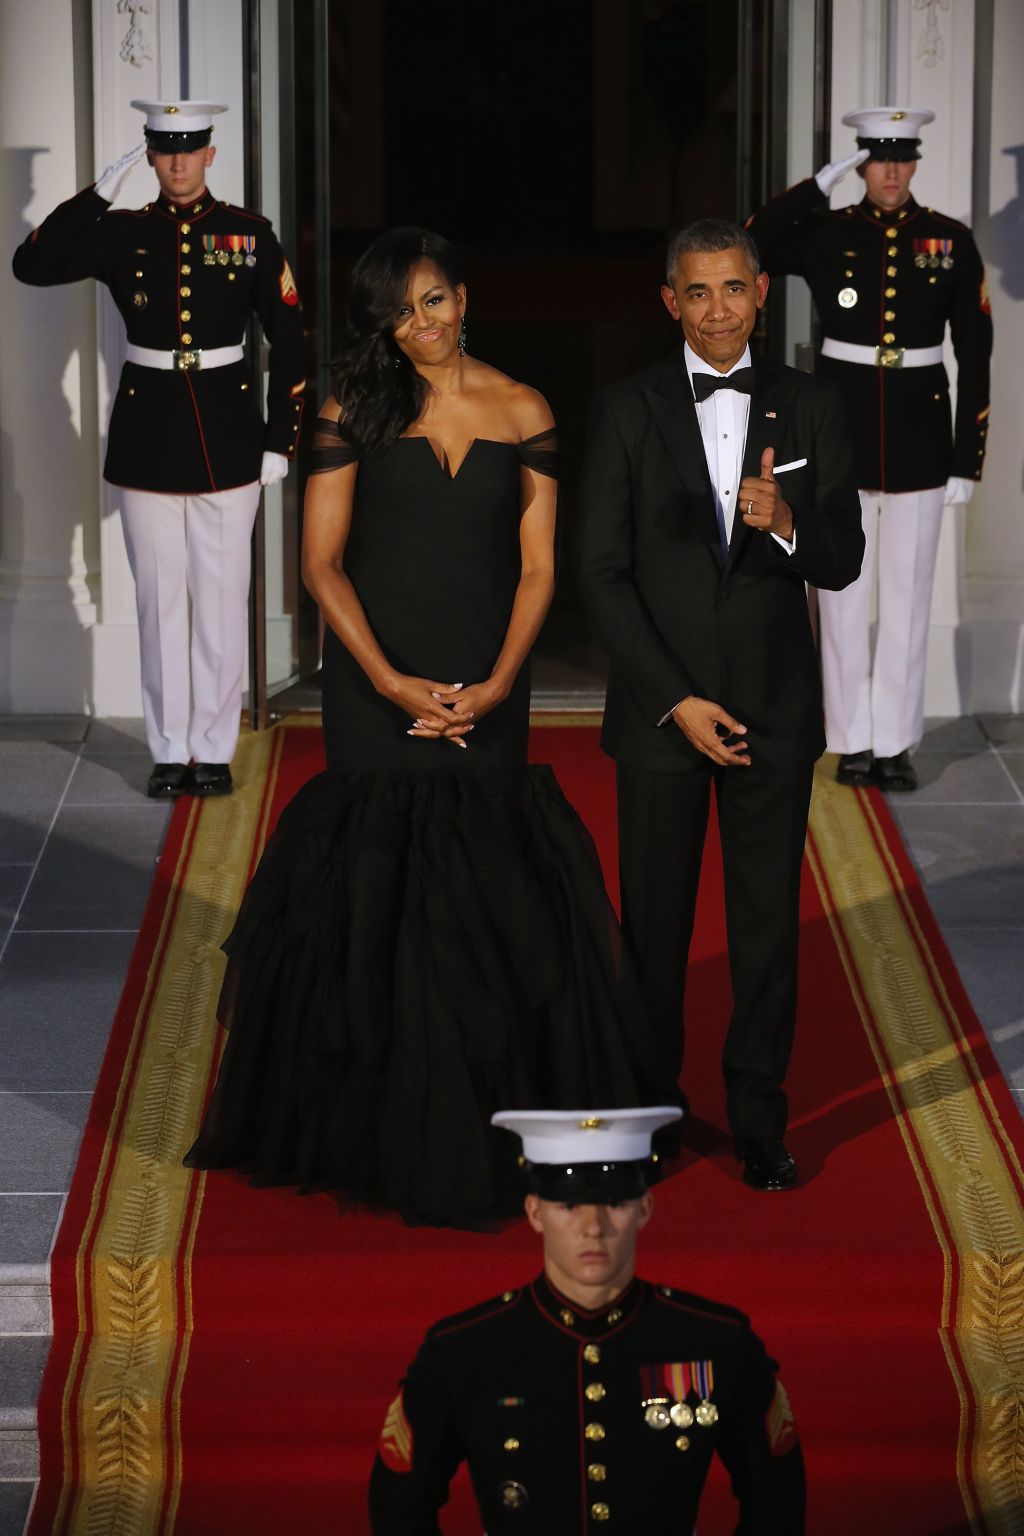 President Barack Obama and Michelle Obama waiting on the North Portico for the arrival of Chinese President Xi Jinping and his wife Madame Peng Liyuan ahead of a state dinner at the White House September 25, 2015 in Washington, DC.